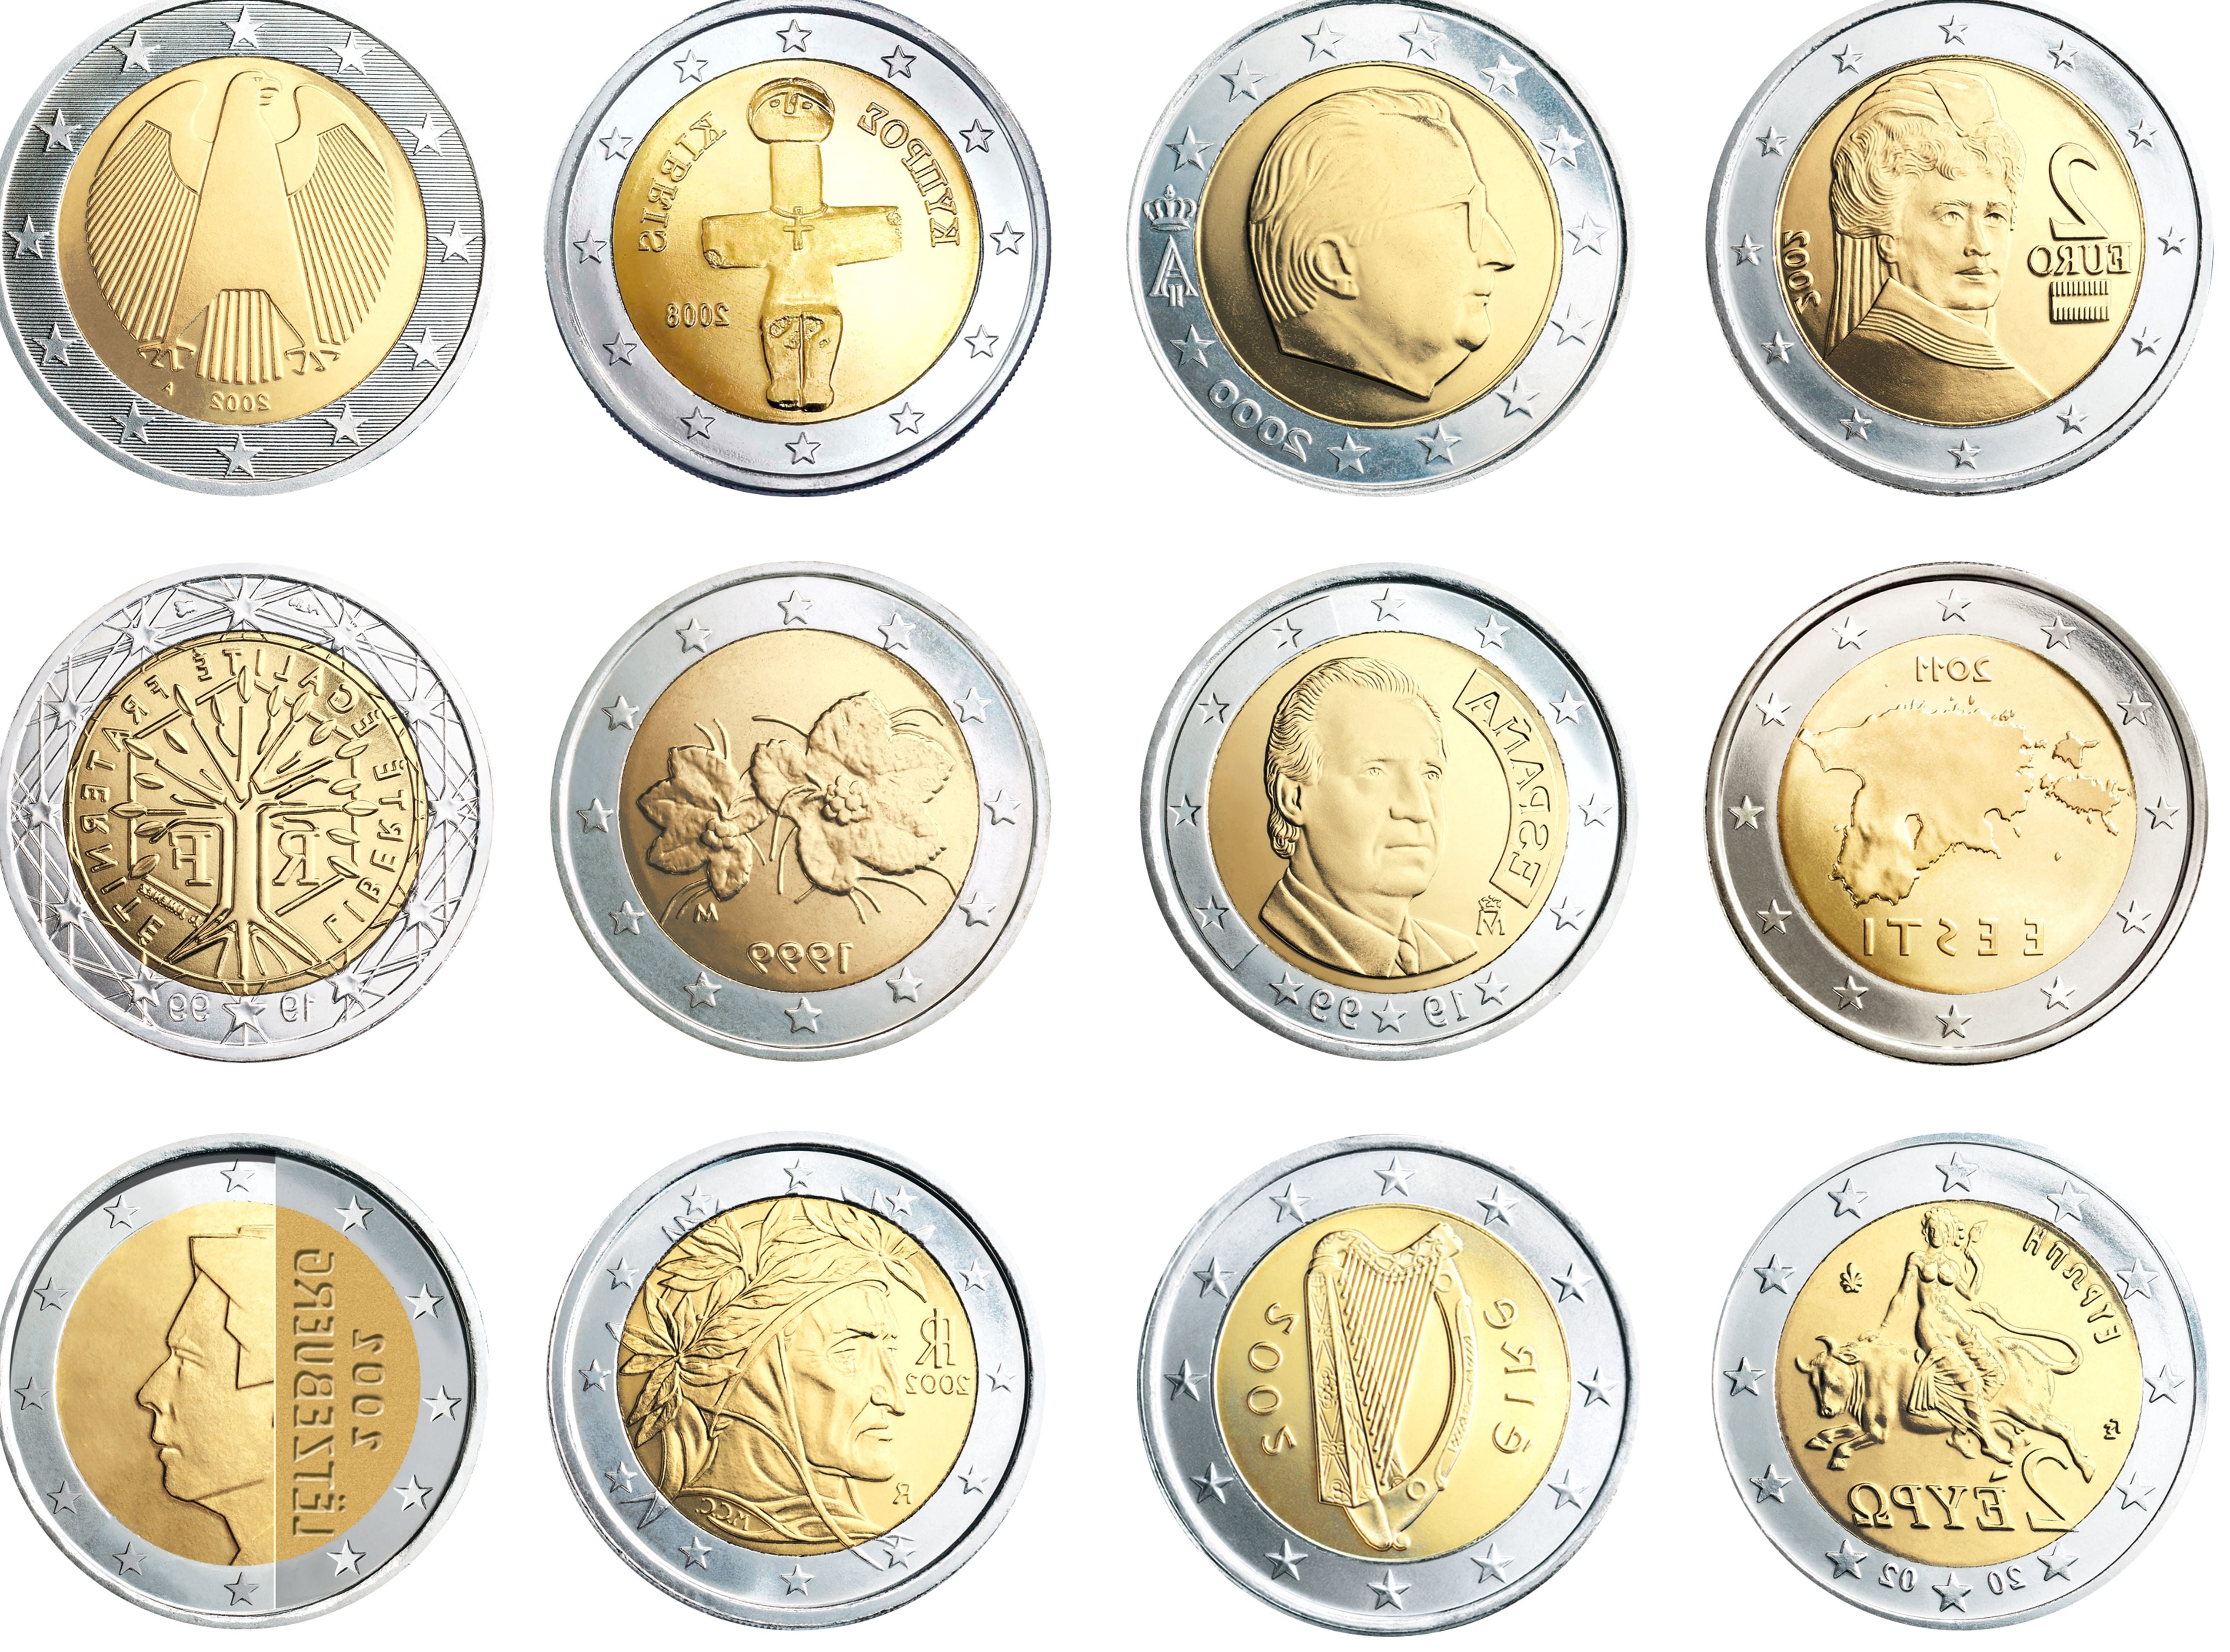 Free picture: metal coins, gold, business, coin, collection, profit, revenue